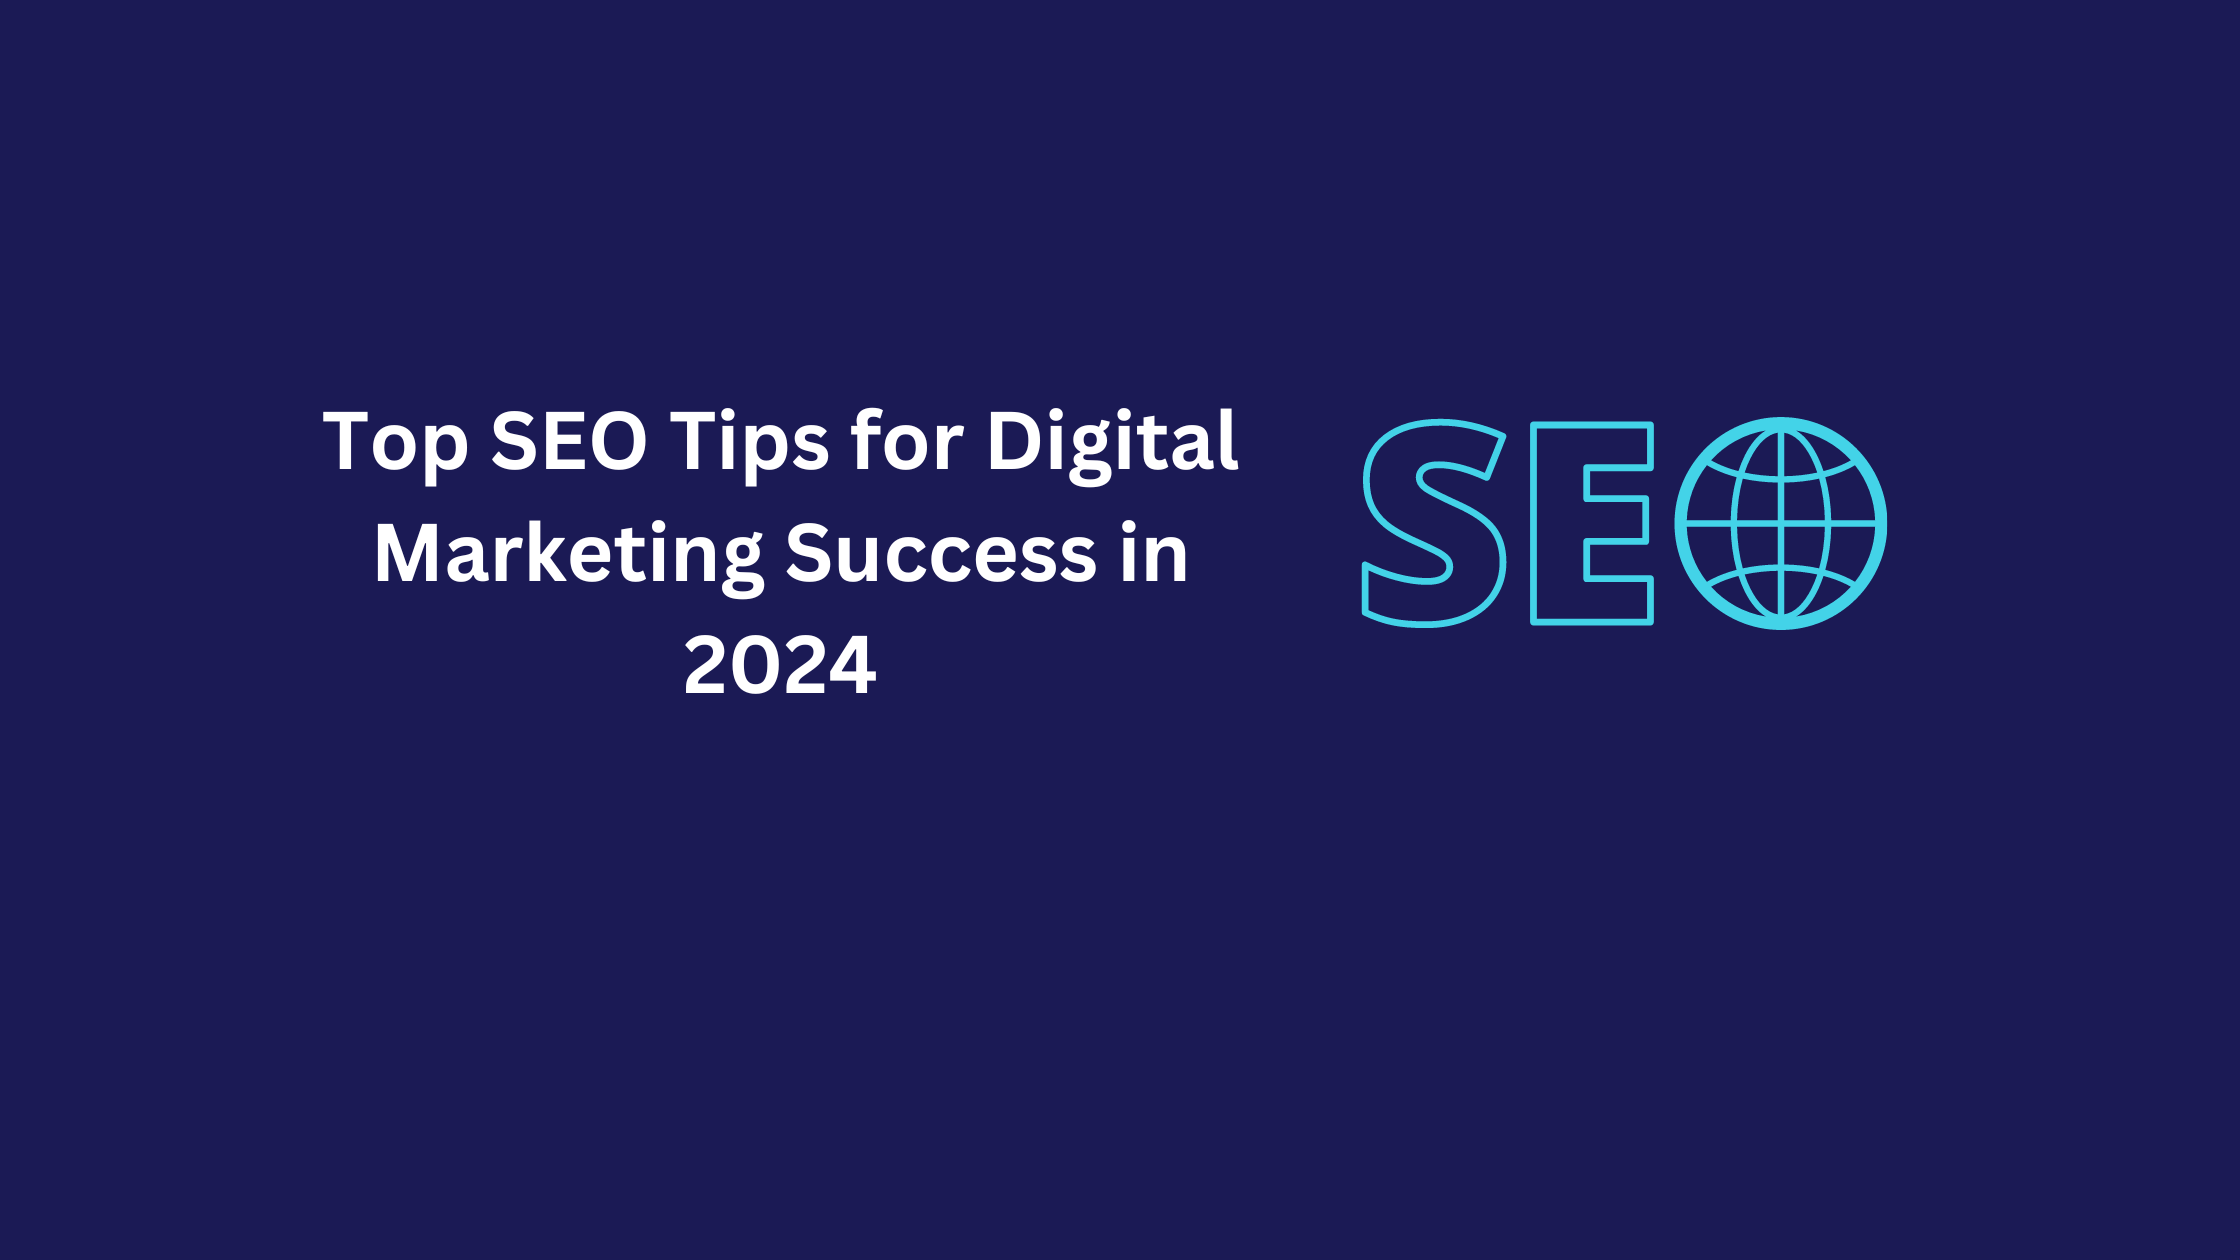 Top SEO Tips for Digital Marketing Success in 2024